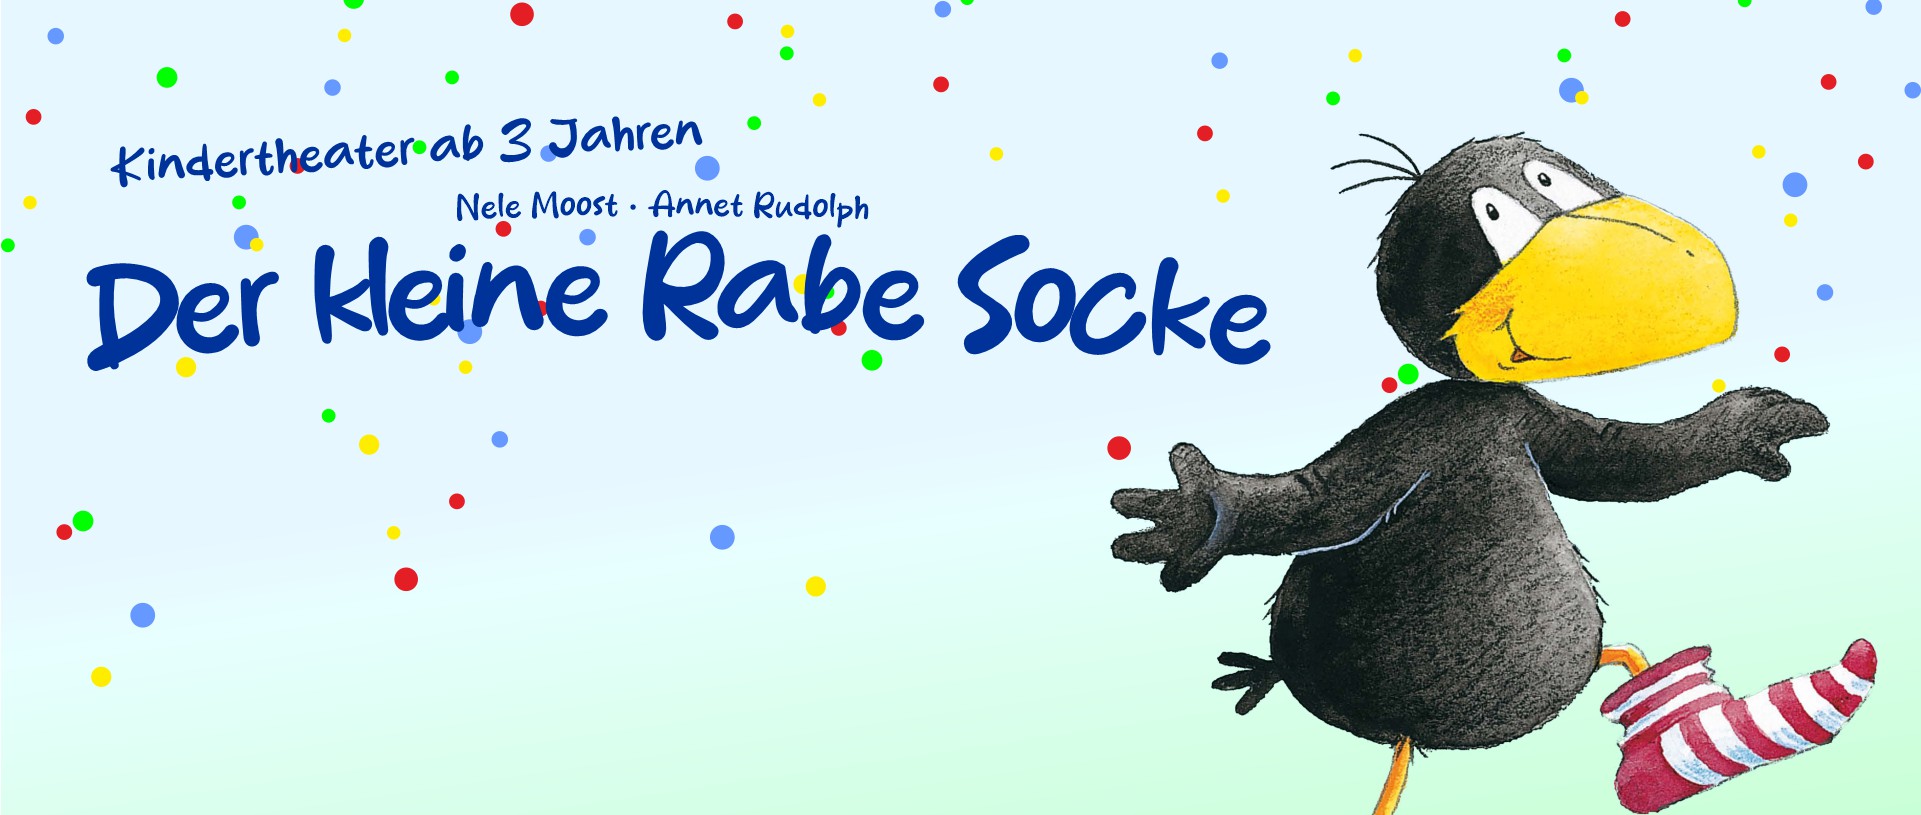 You are currently viewing Der kleine Rabe Socke